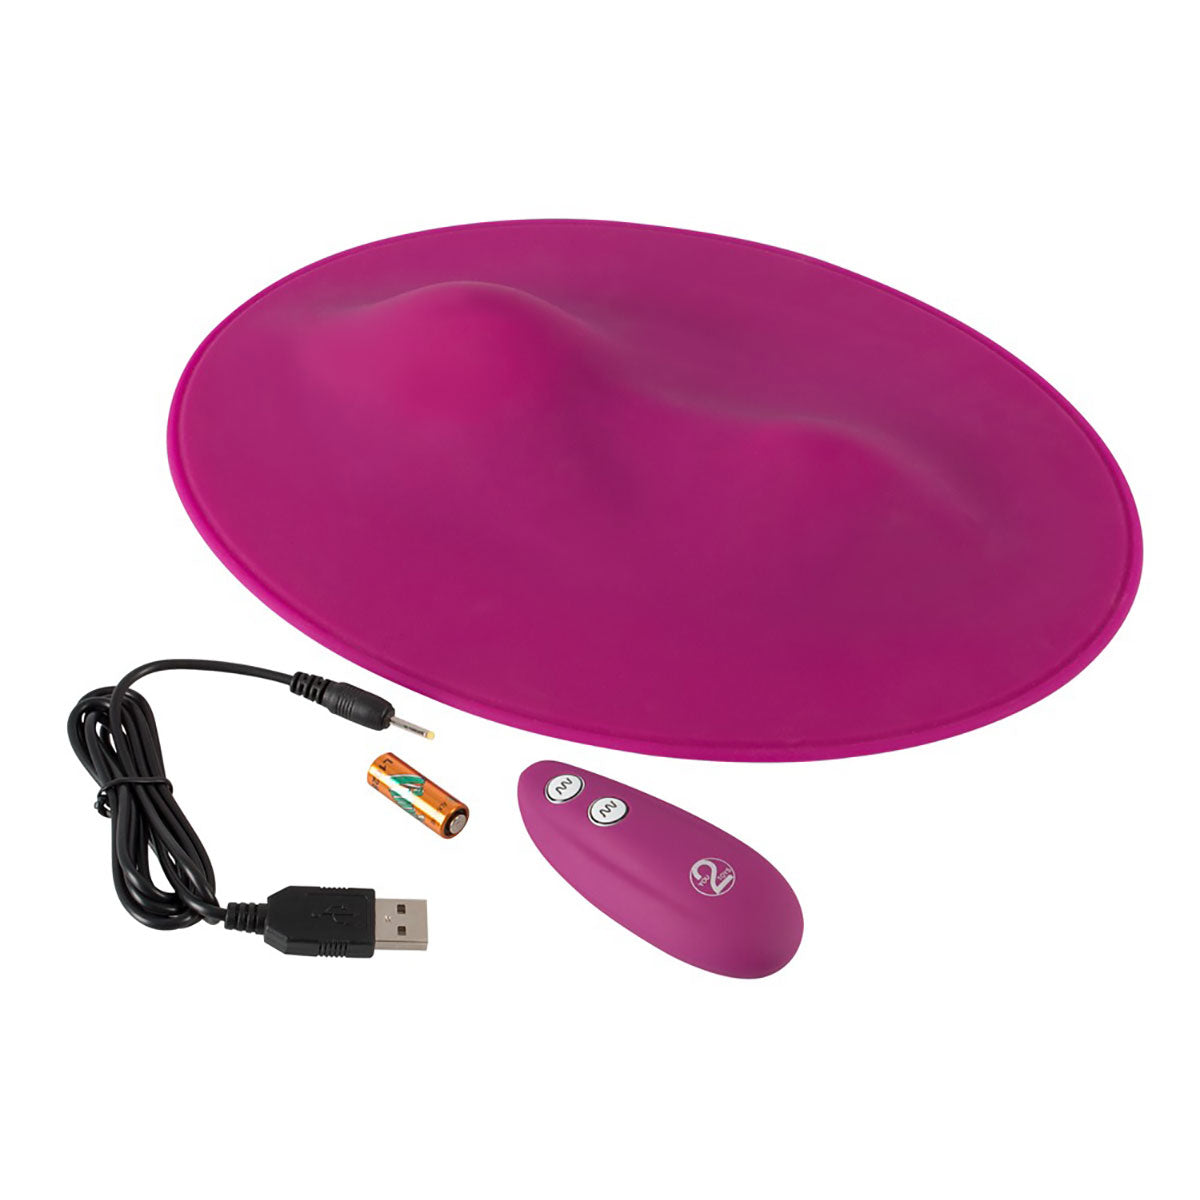 VibePad Remote Controlled Grinding Pad